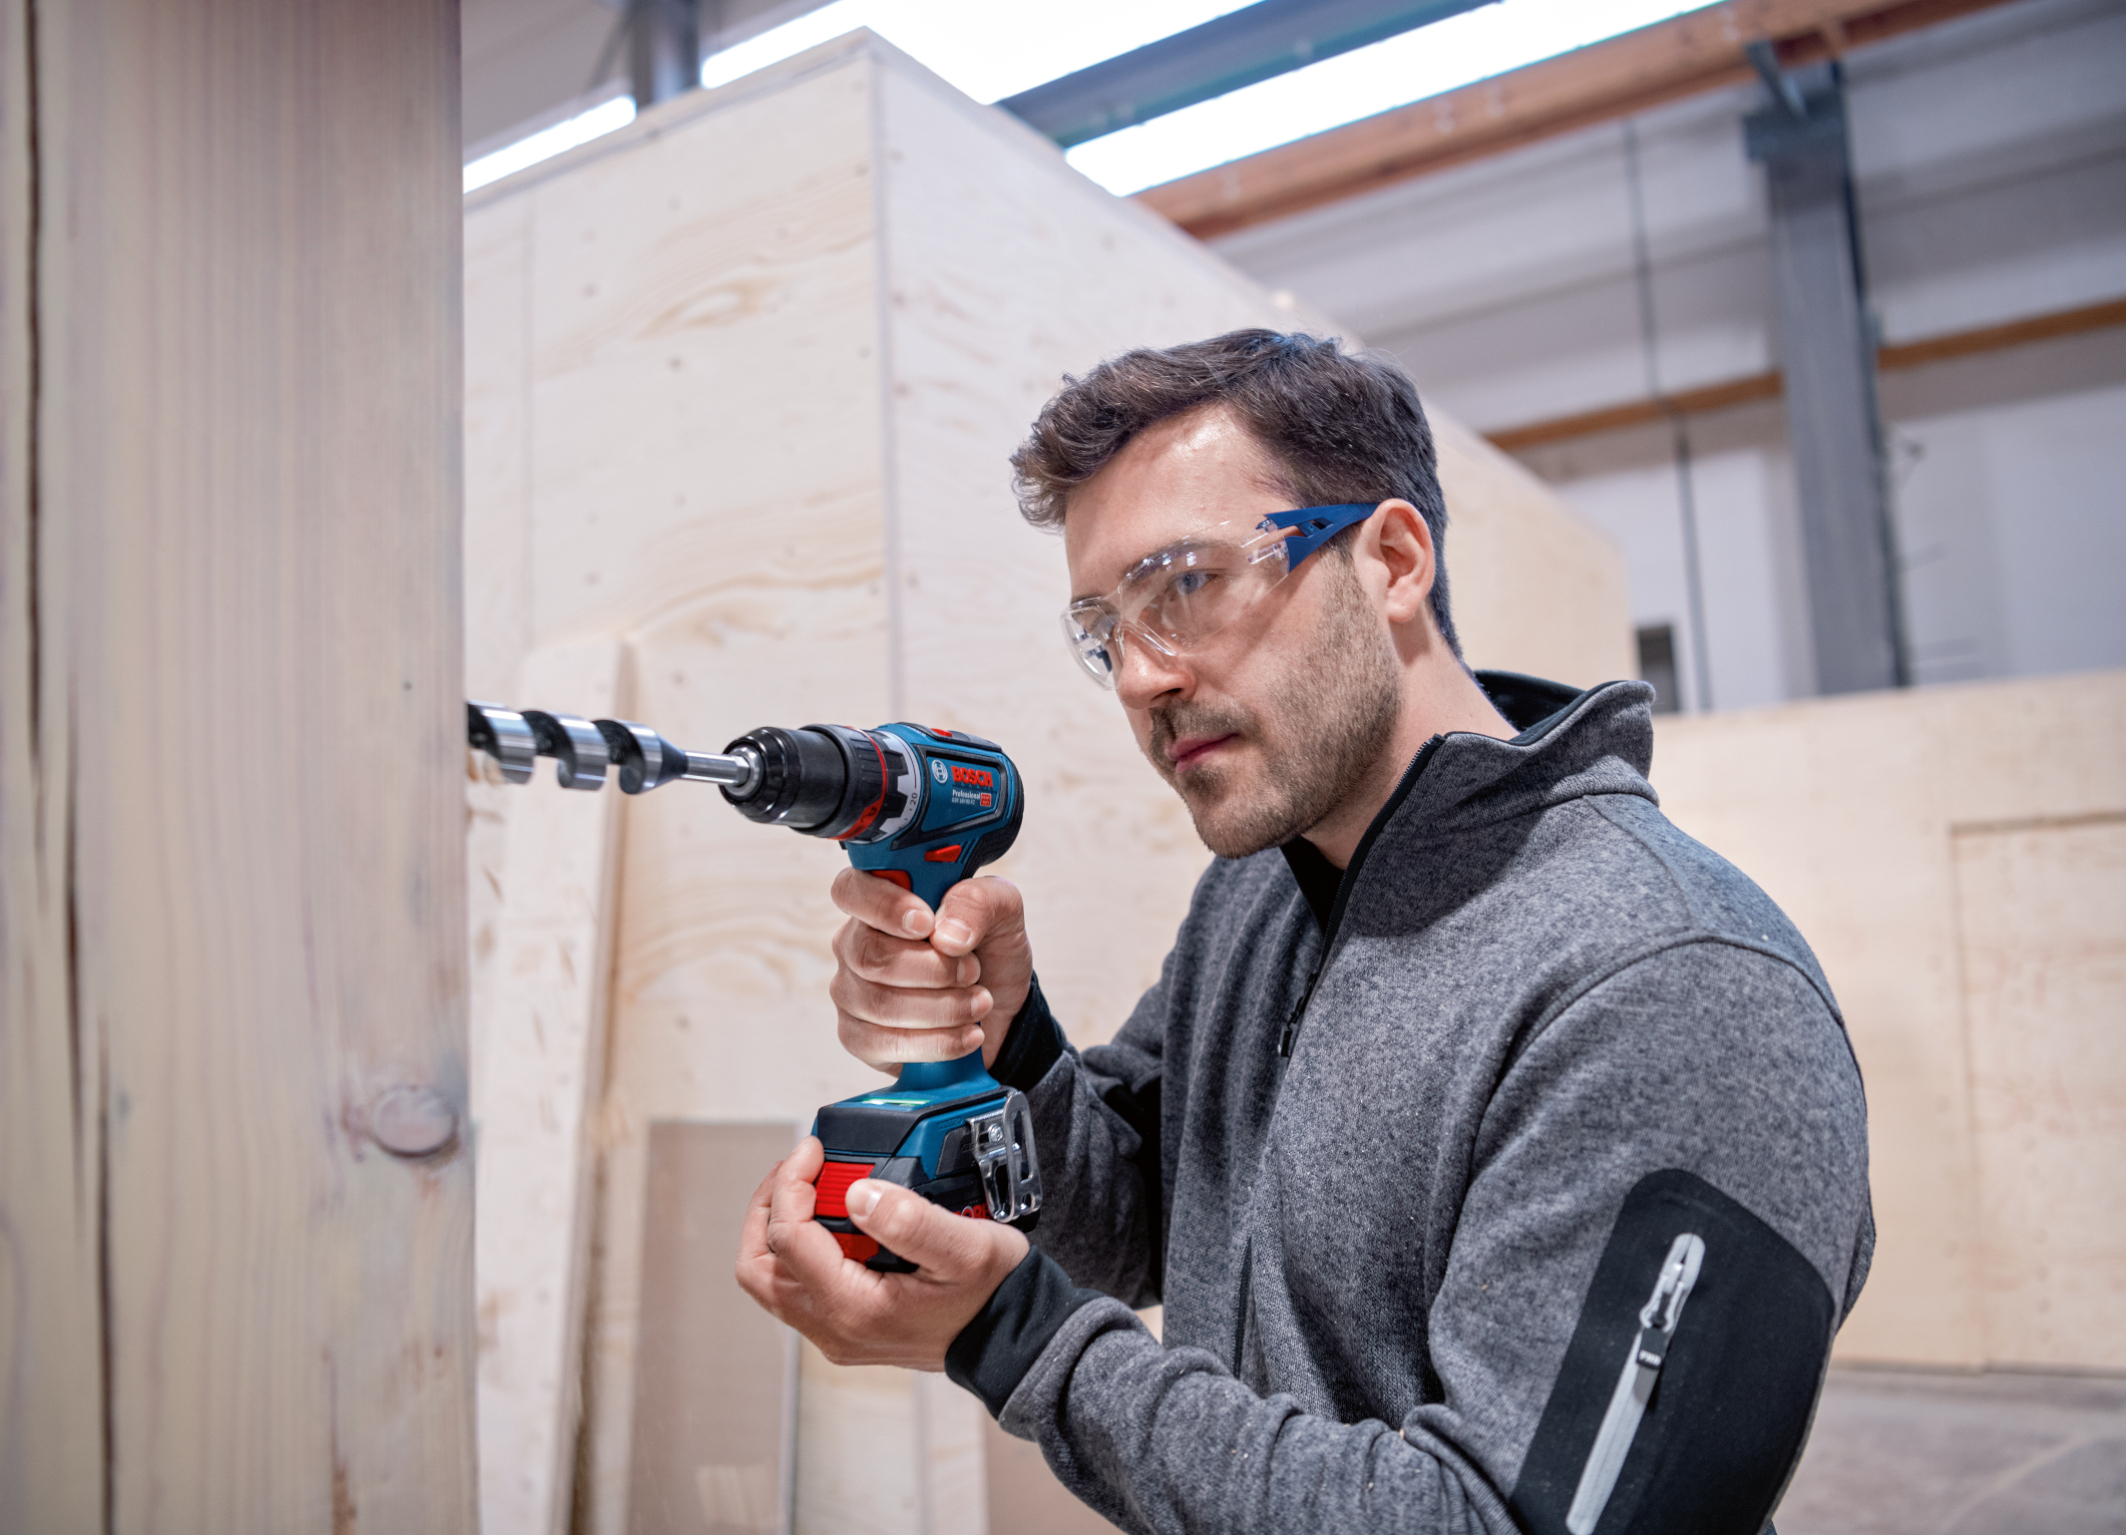 More powerful: FlexiClick drill driver from Bosch with metal drill chuck attachment